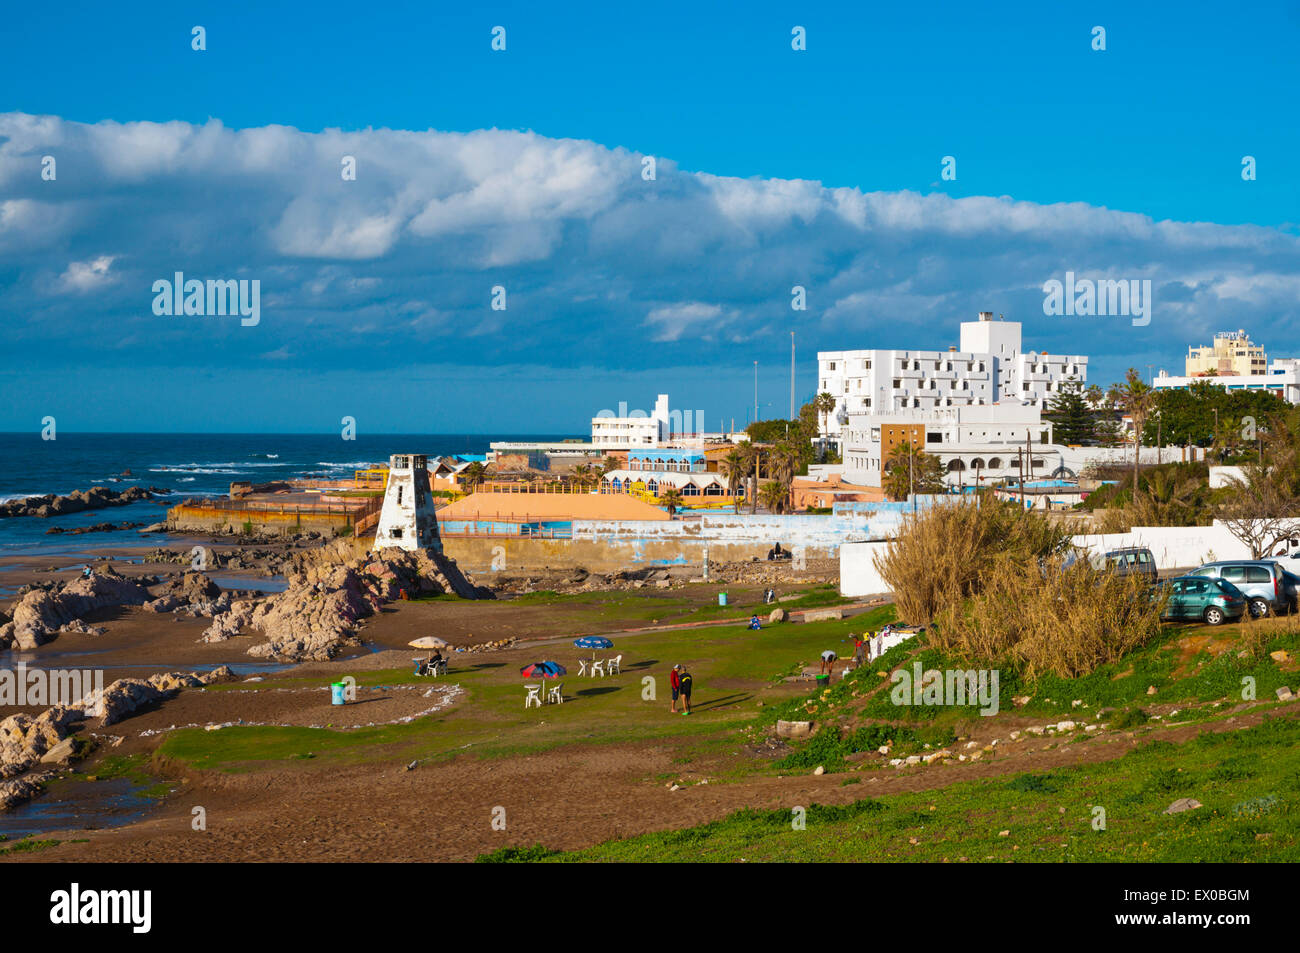 Ain Diab, resort, district outside the centre, Casablanca, Morocco, northern Africa Stock Photo